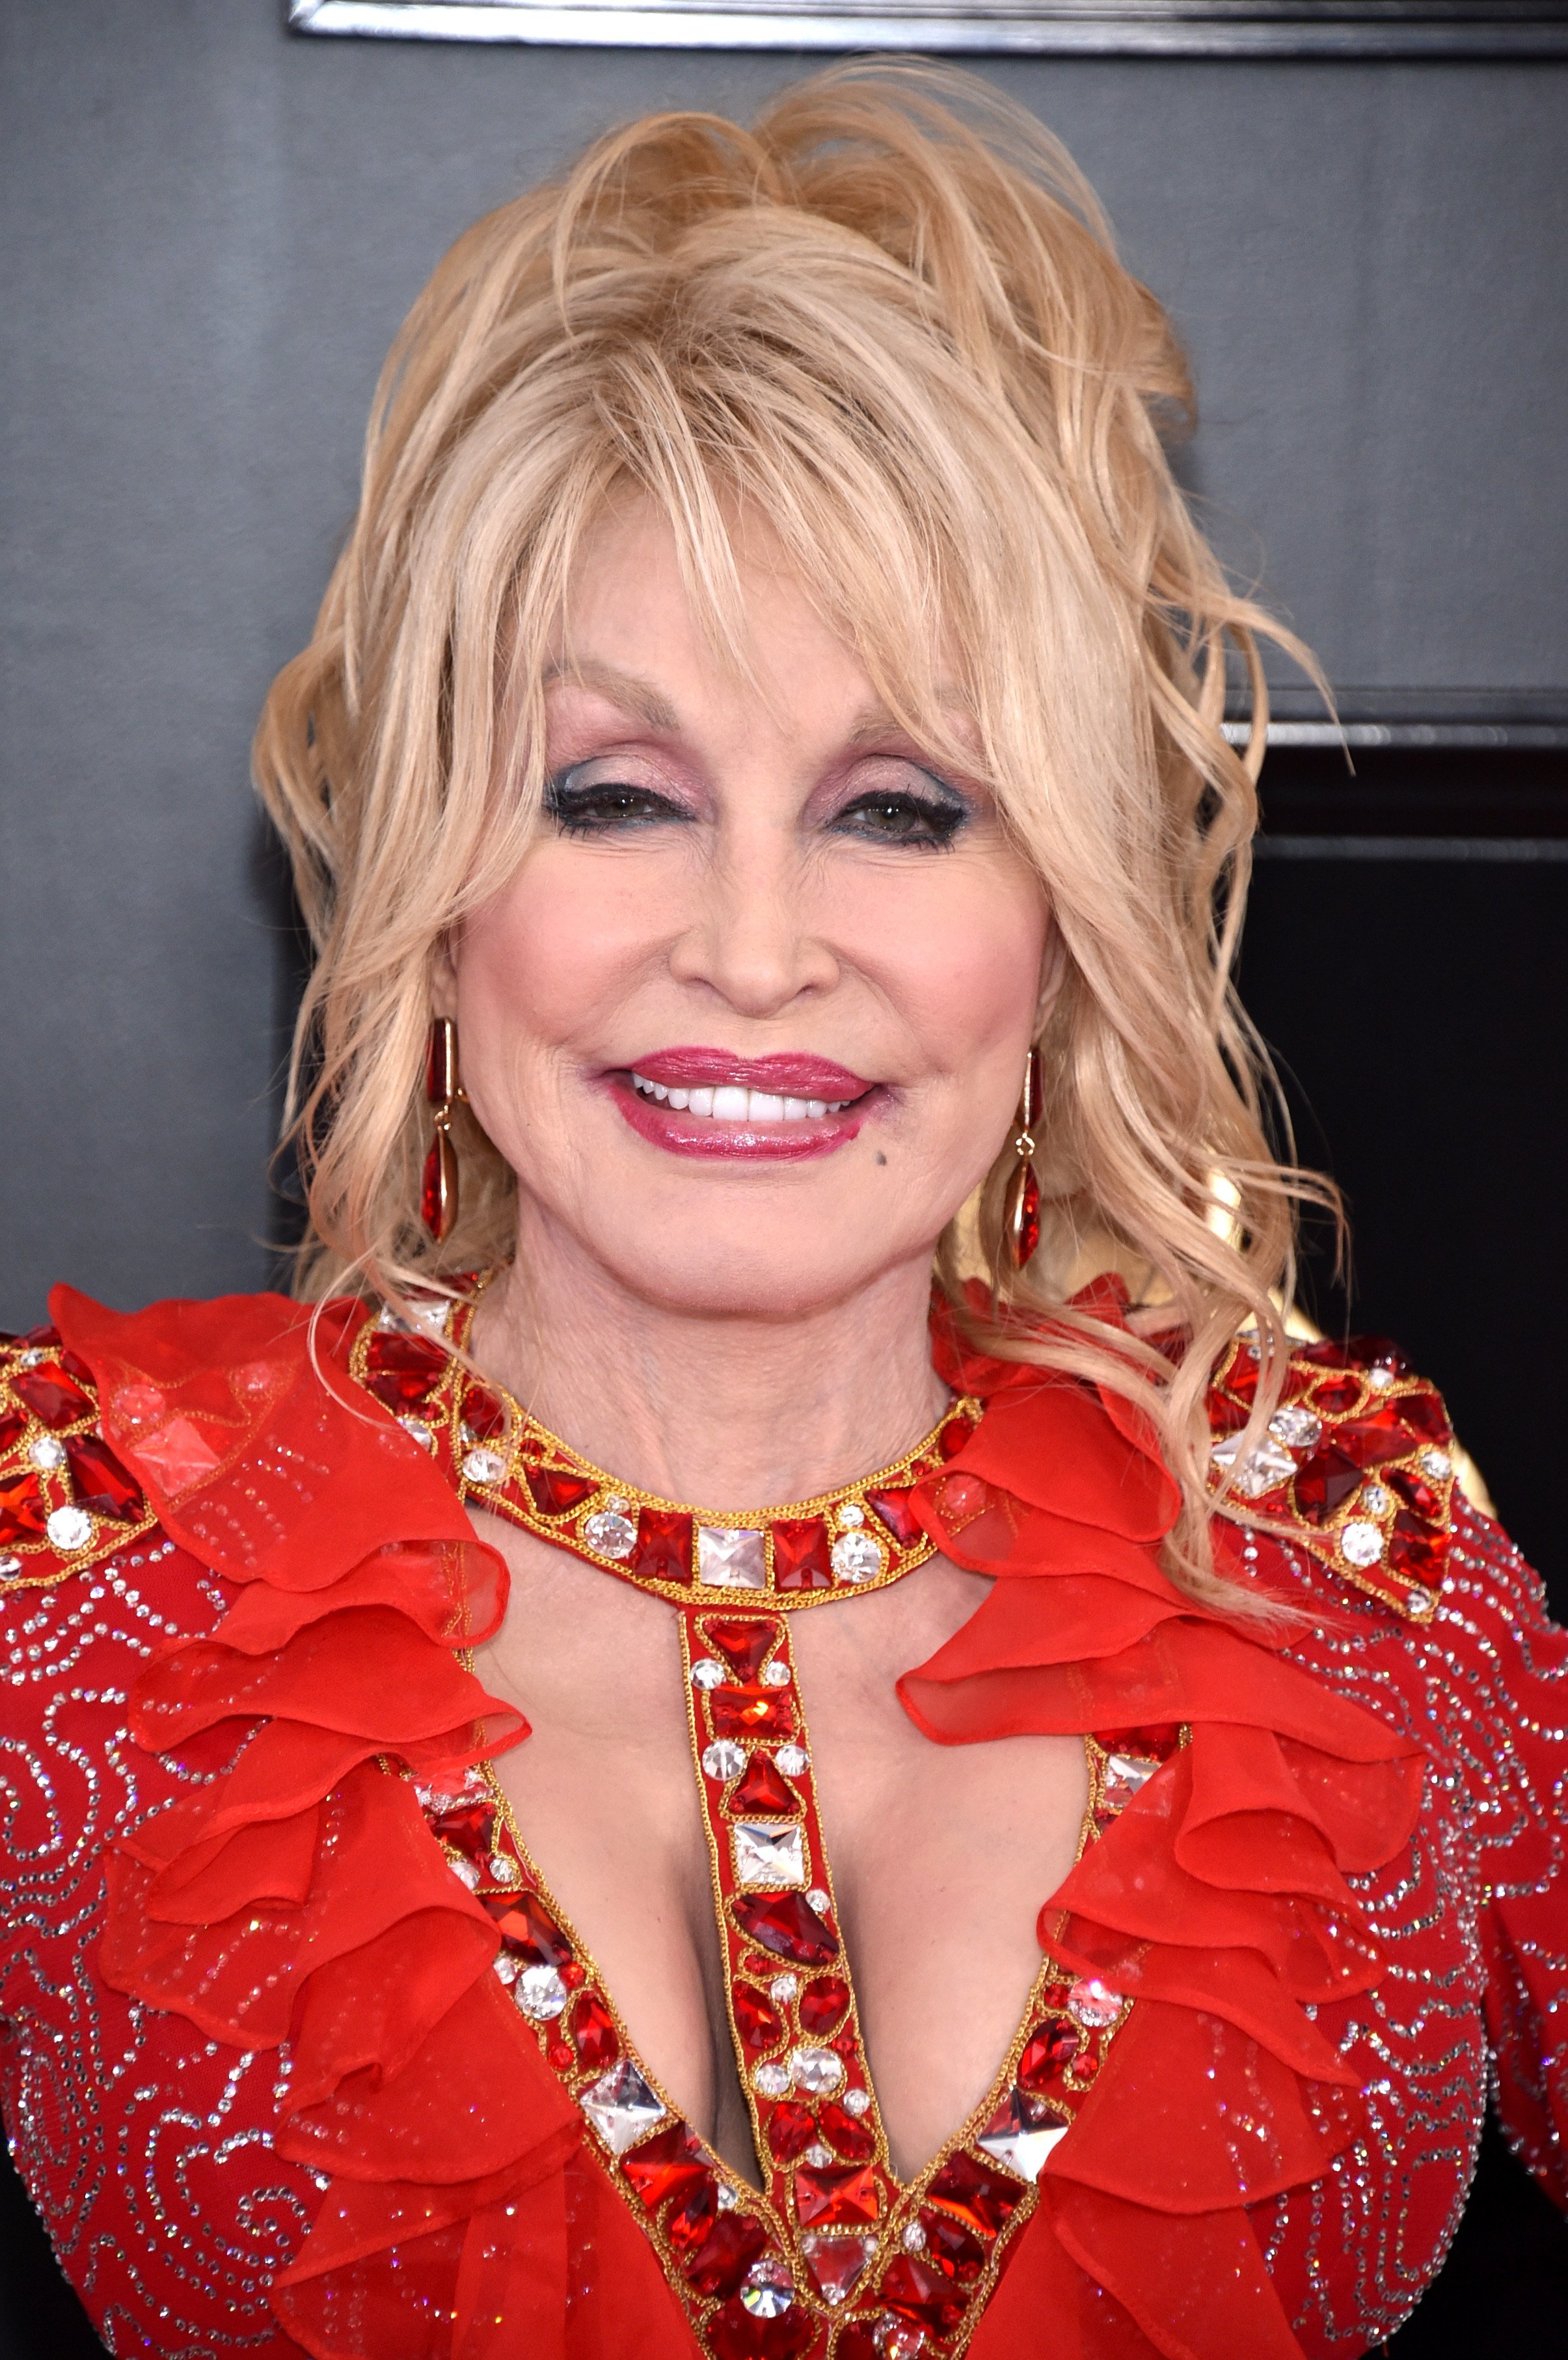 Dolly Parton attends the 61st Annual Grammy in Los Angeles, California in February 10, 2019 | Photo: Getty Images